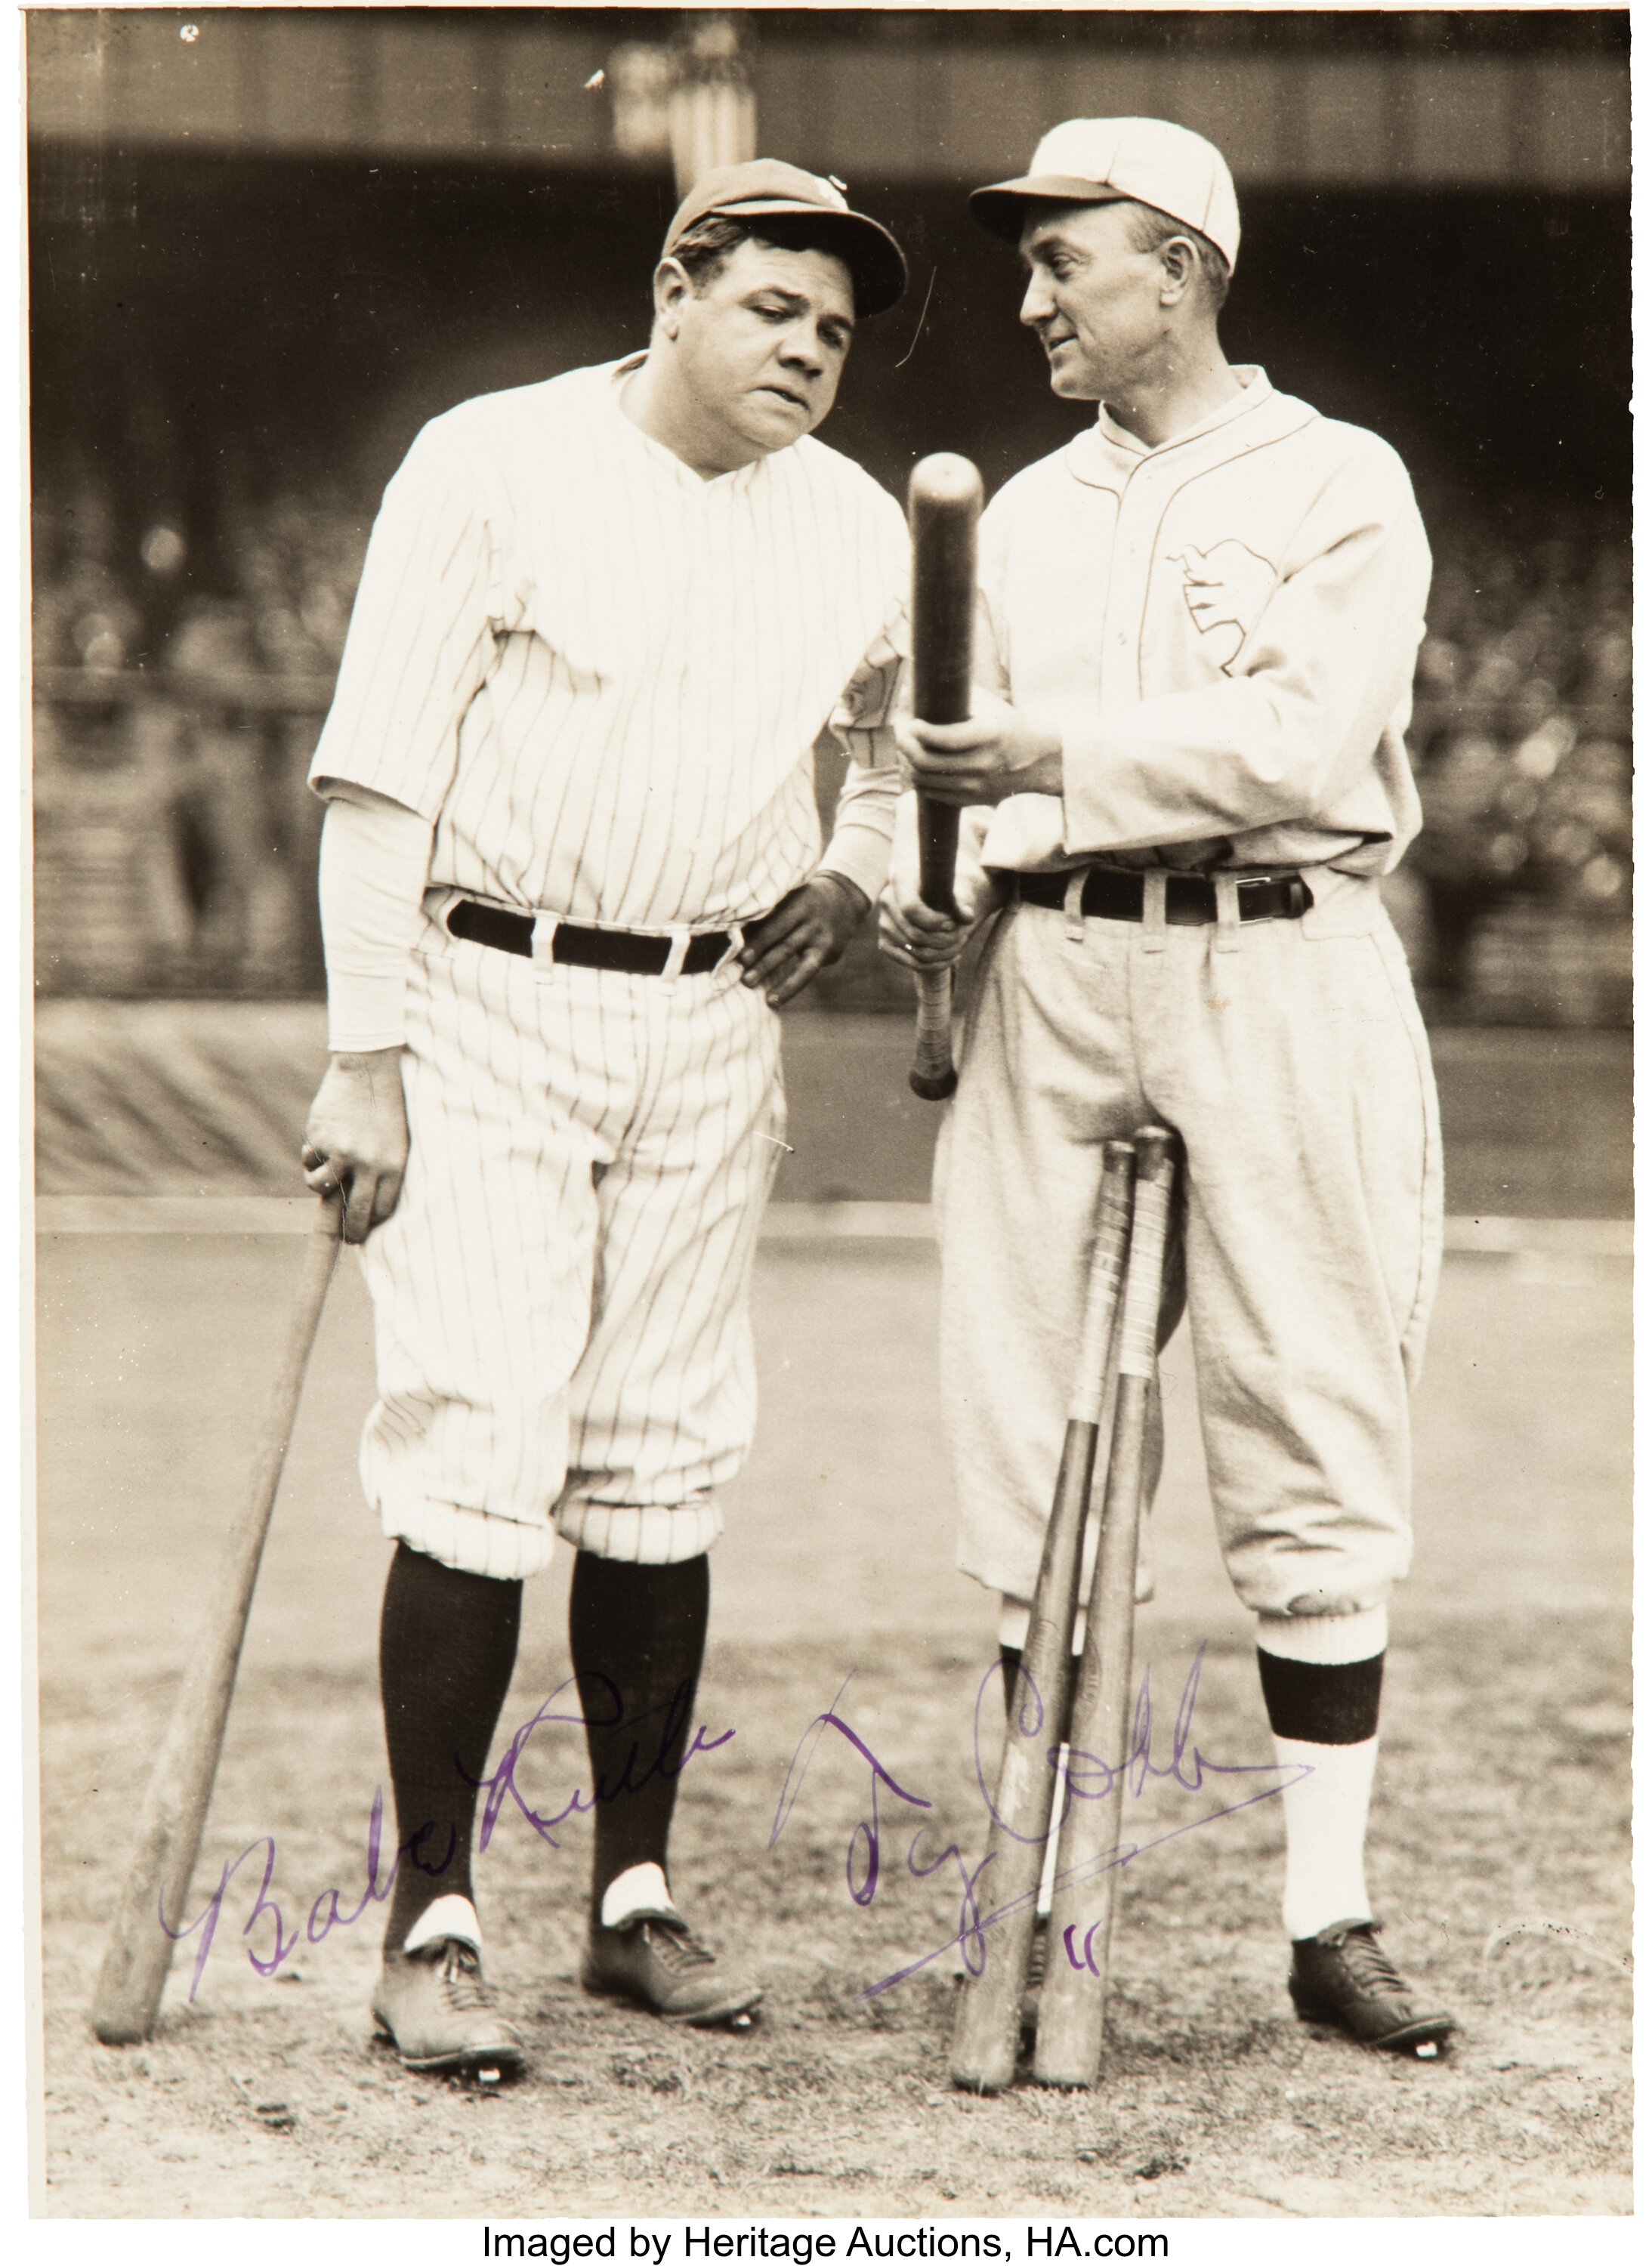 The Only Known Babe Ruth & Ty Cobb Dual-Signed Photograph